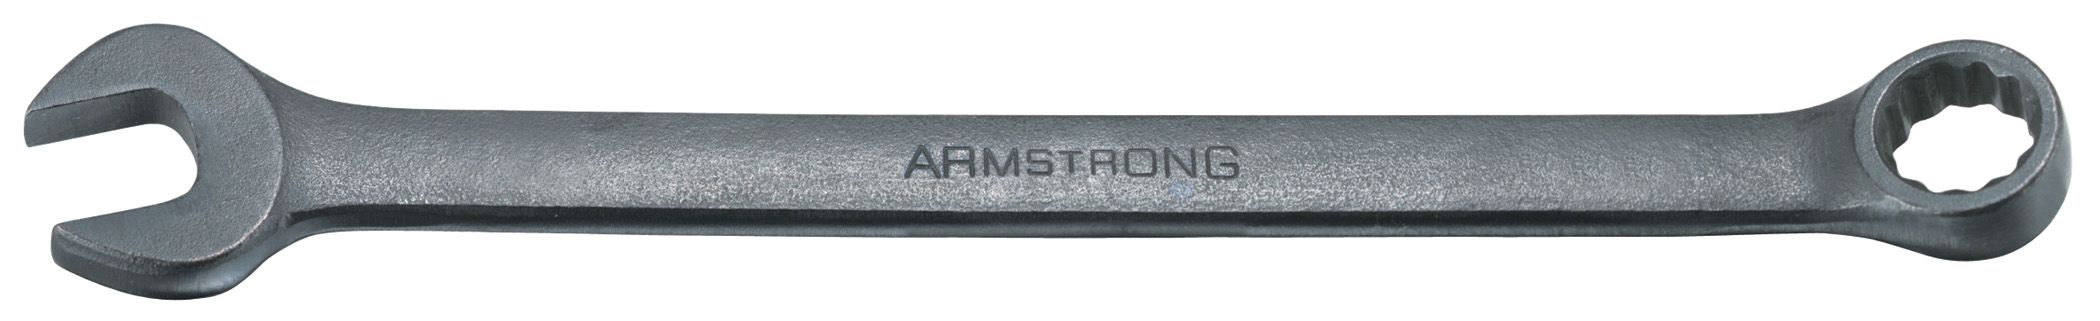 Armstrong 1/4 in. 12 pt. Black Oxide Long Combination Wrench